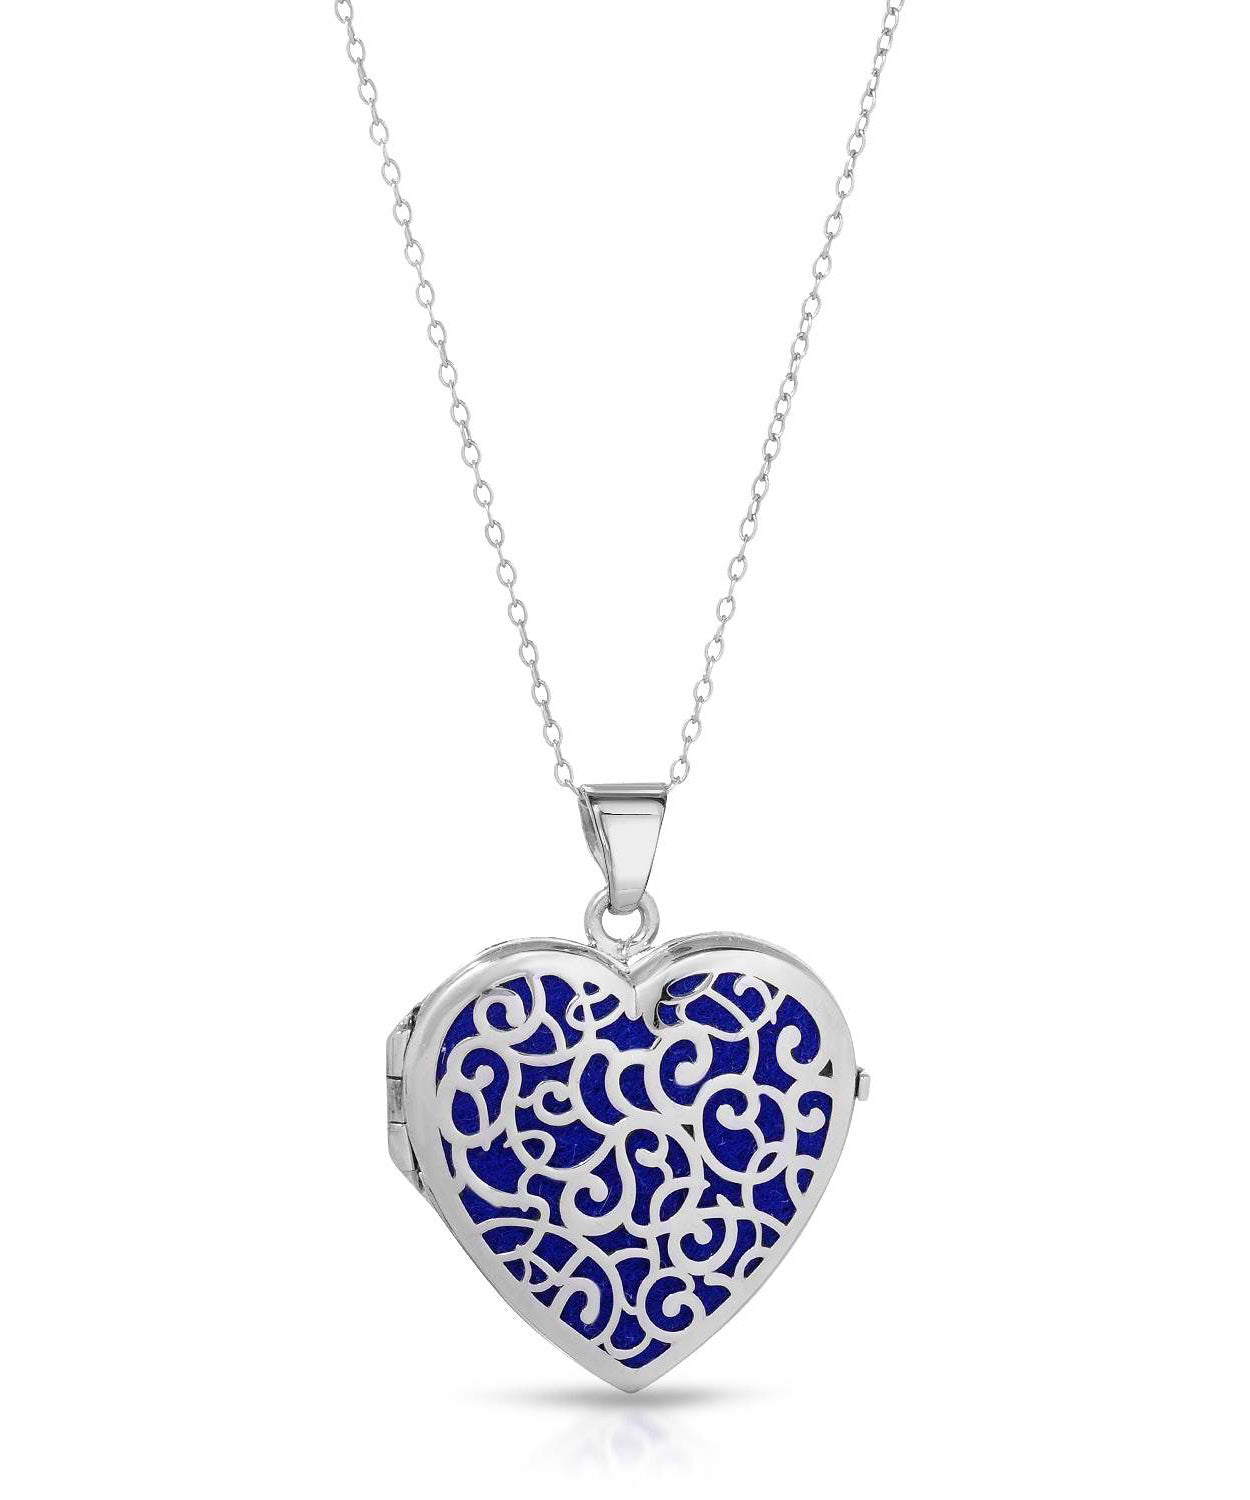 Patterns of Love Collection Rhodium Plated 925 Sterling Silver Heart Locket Pendant With Chain - Made in Italy View 1